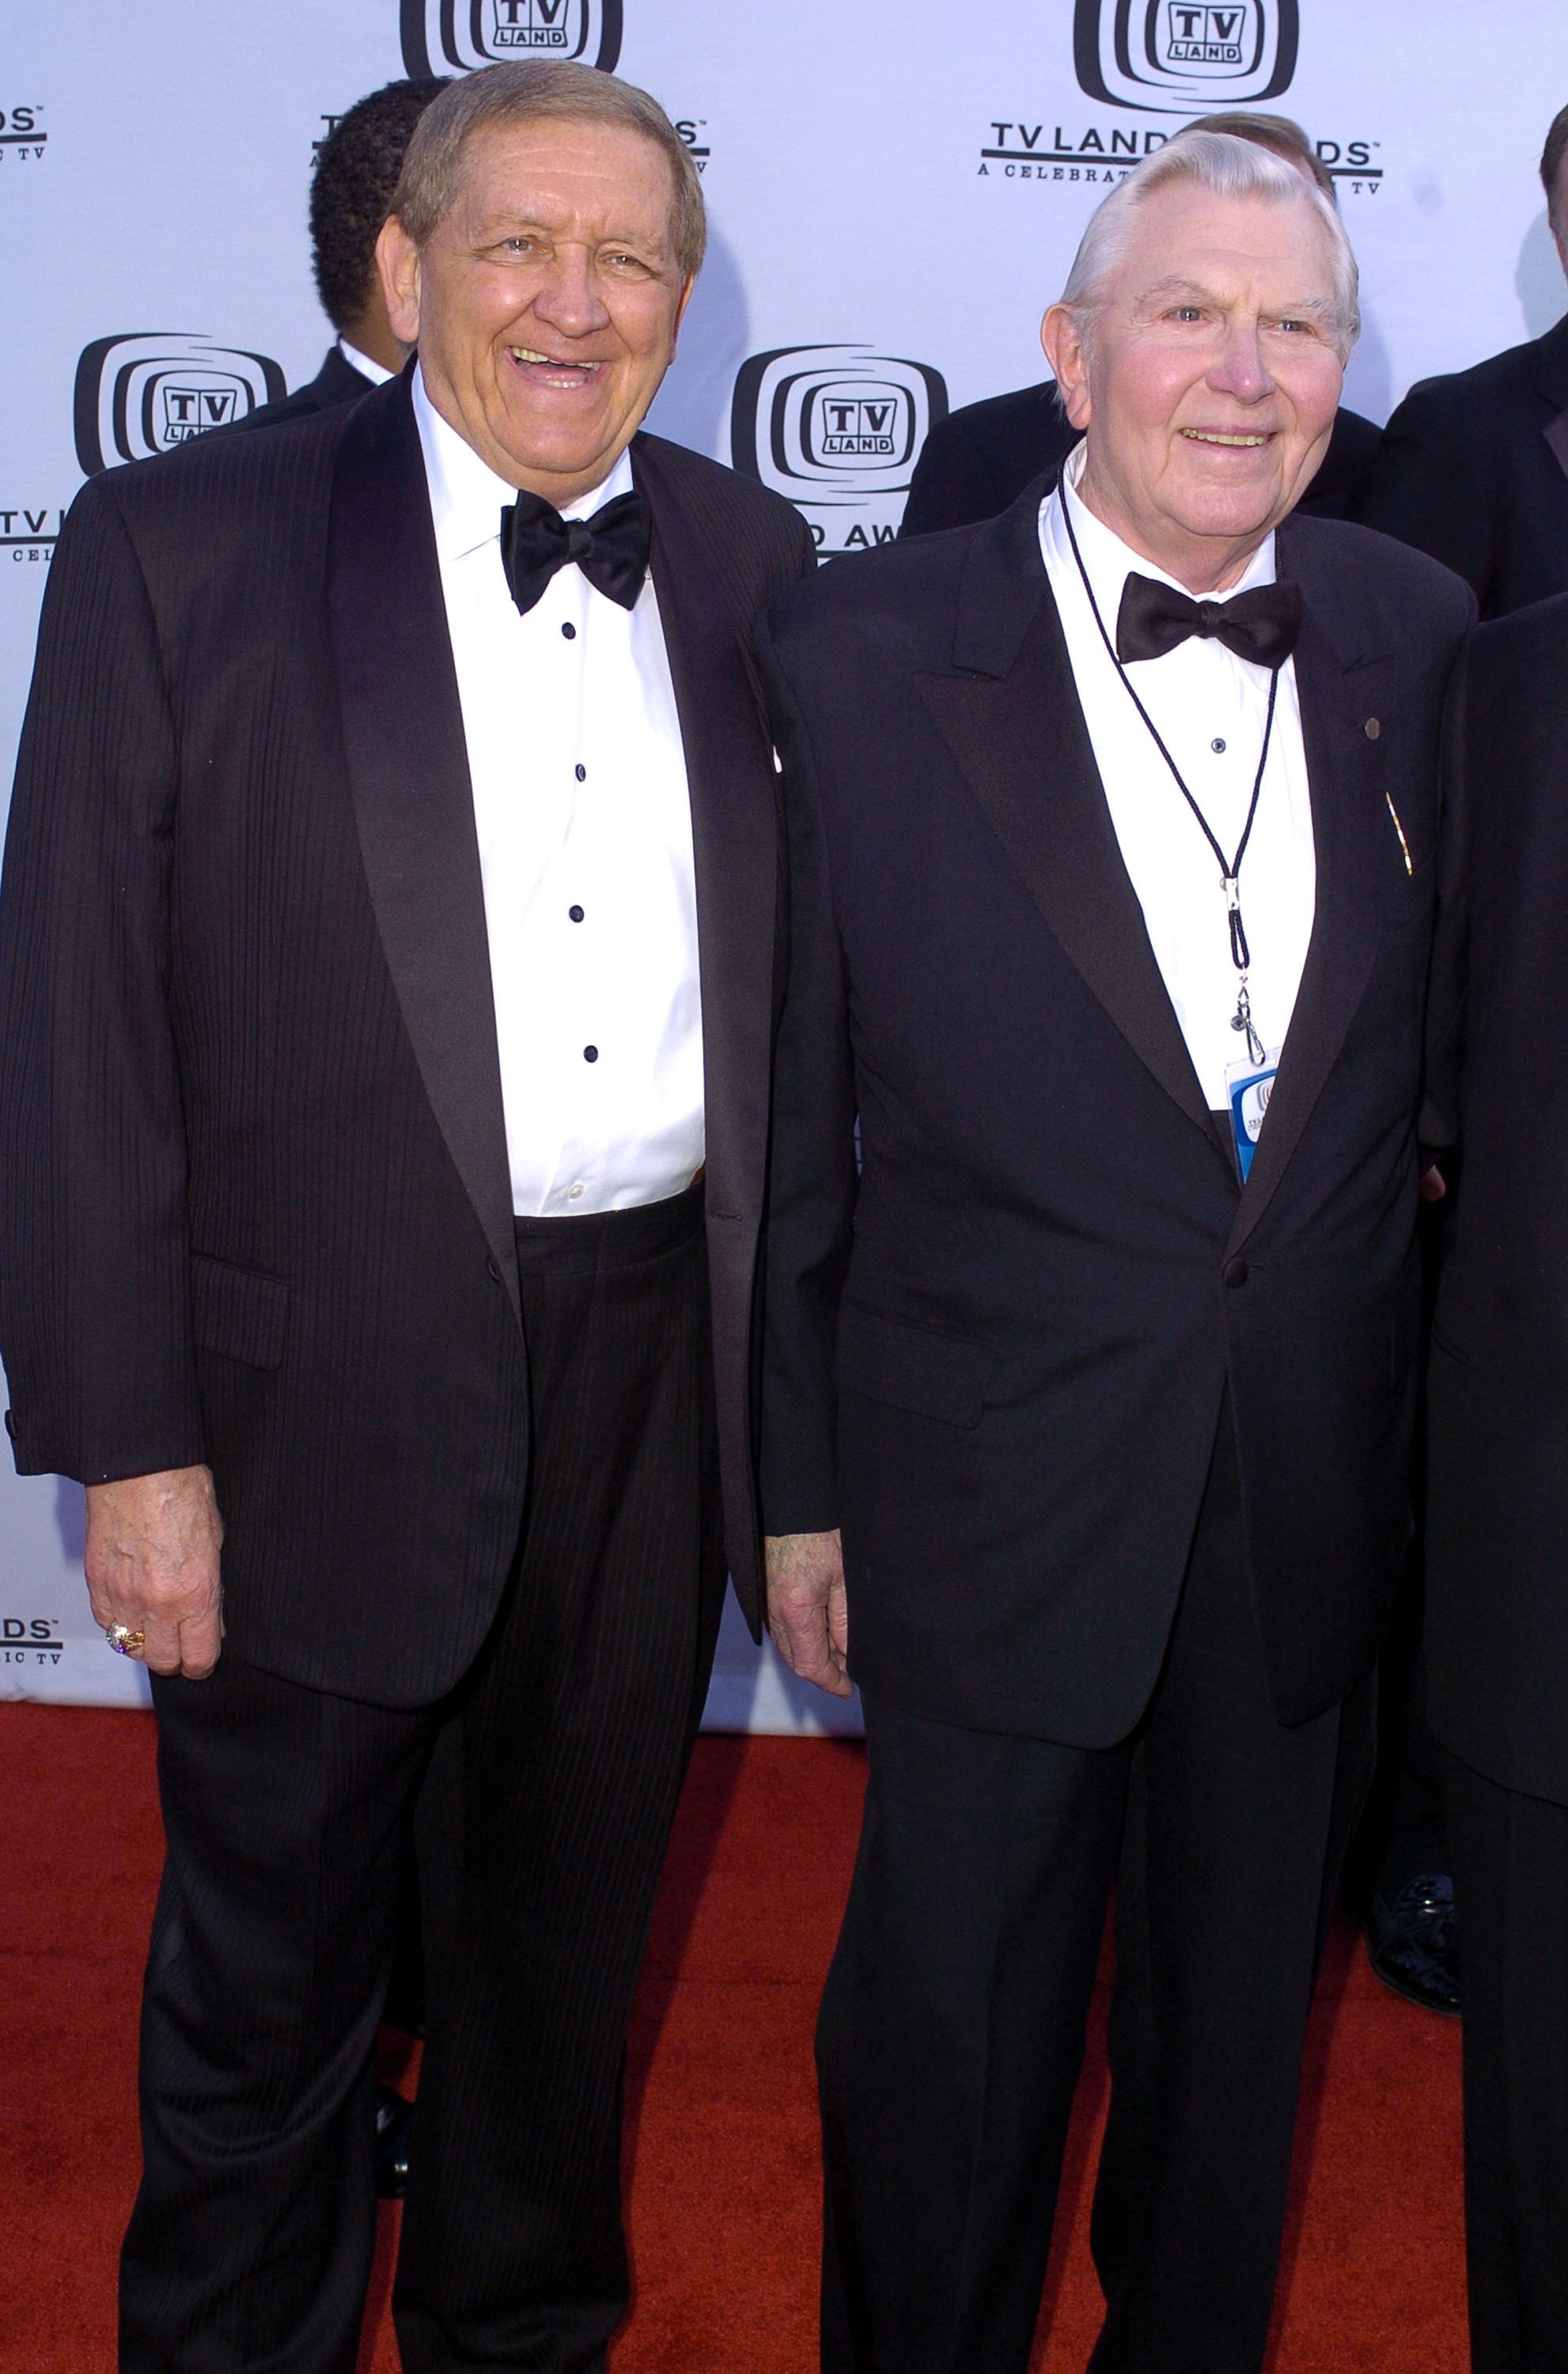 George Lindsey and Andy Griffith in 2004